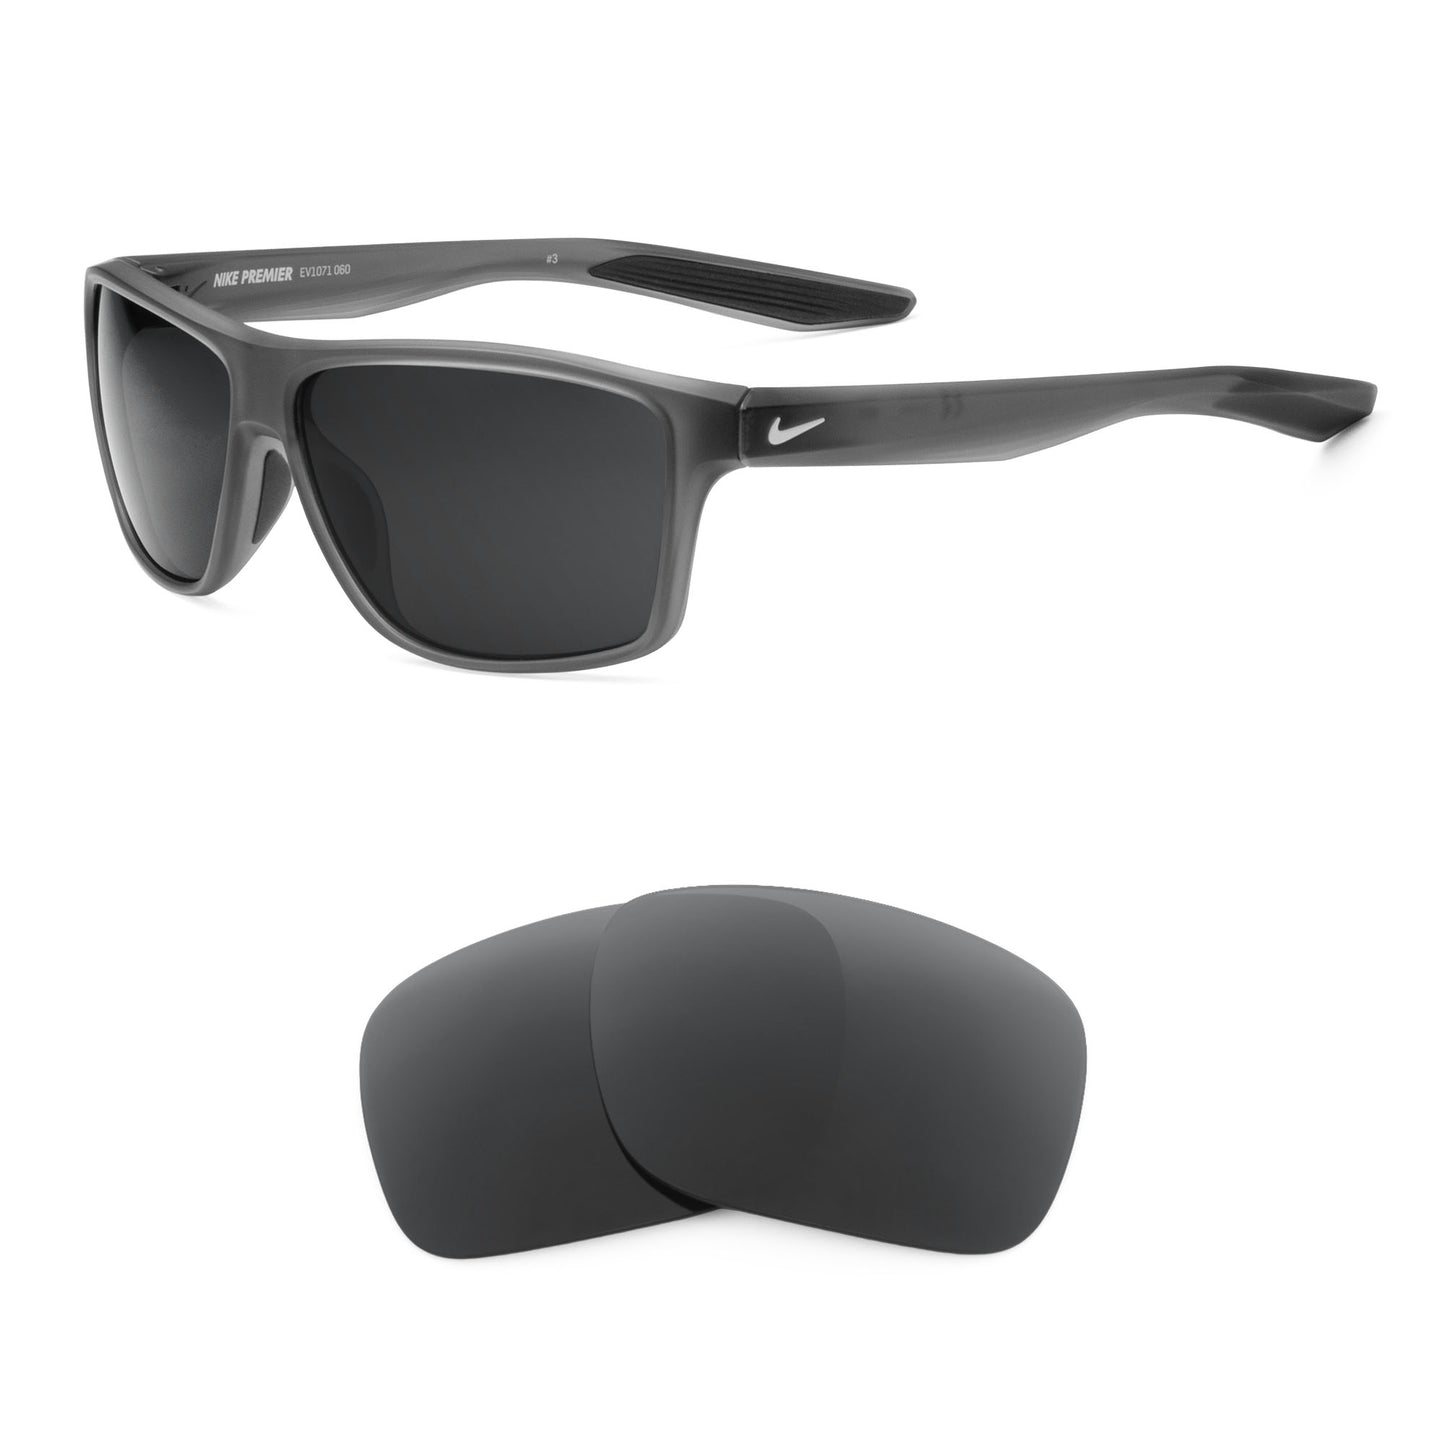 Nike Premier sunglasses with replacement lenses